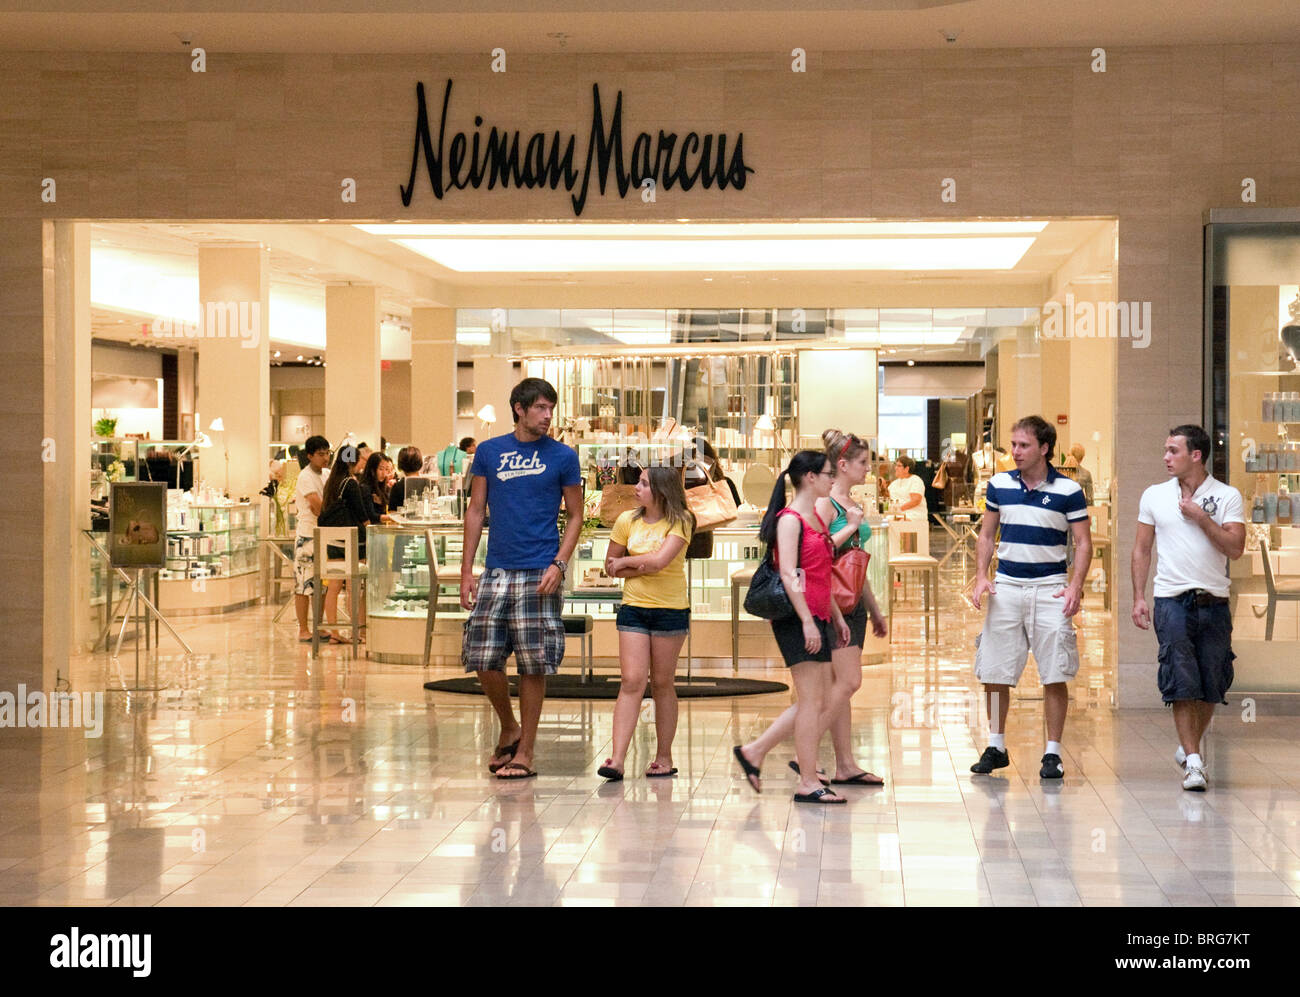 Neiman marcus logo hi-res stock photography and images - Alamy